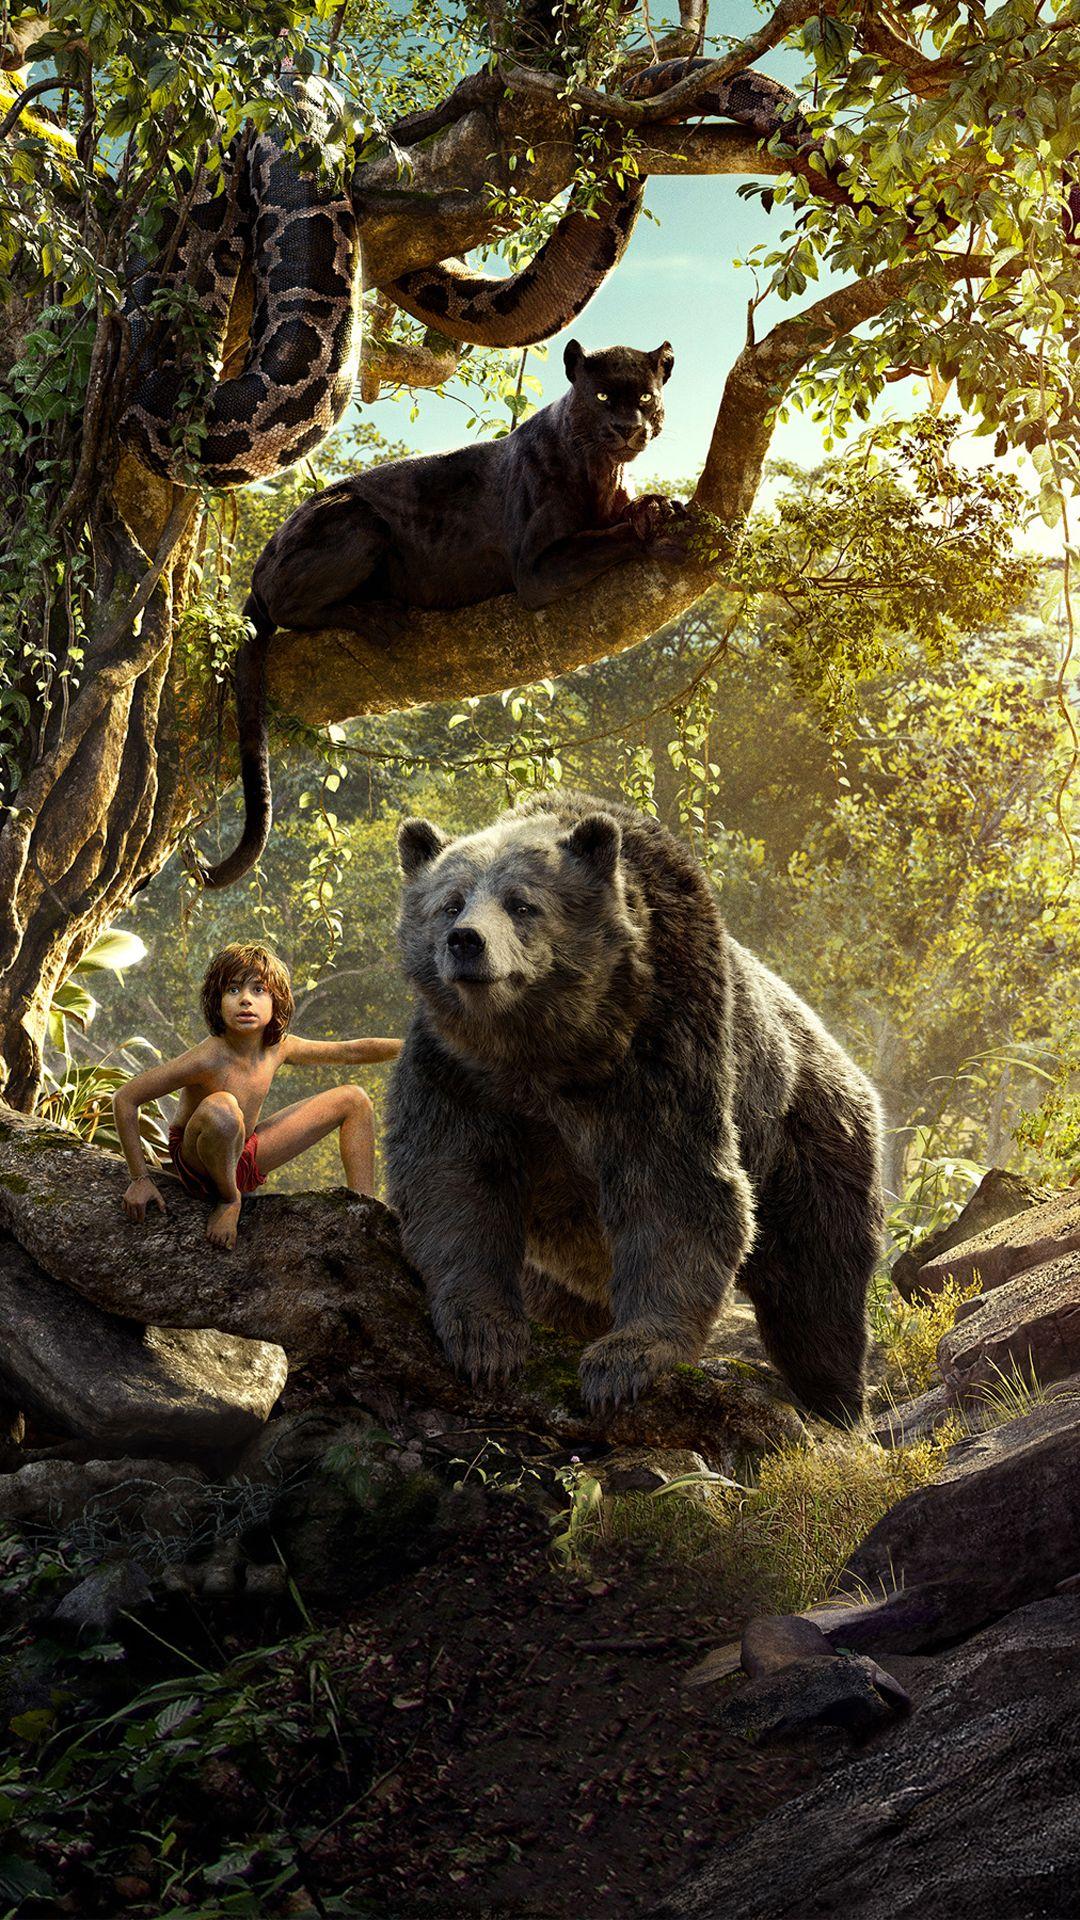 The Jungle Book 2016 Movie Wallpaper for iPhone